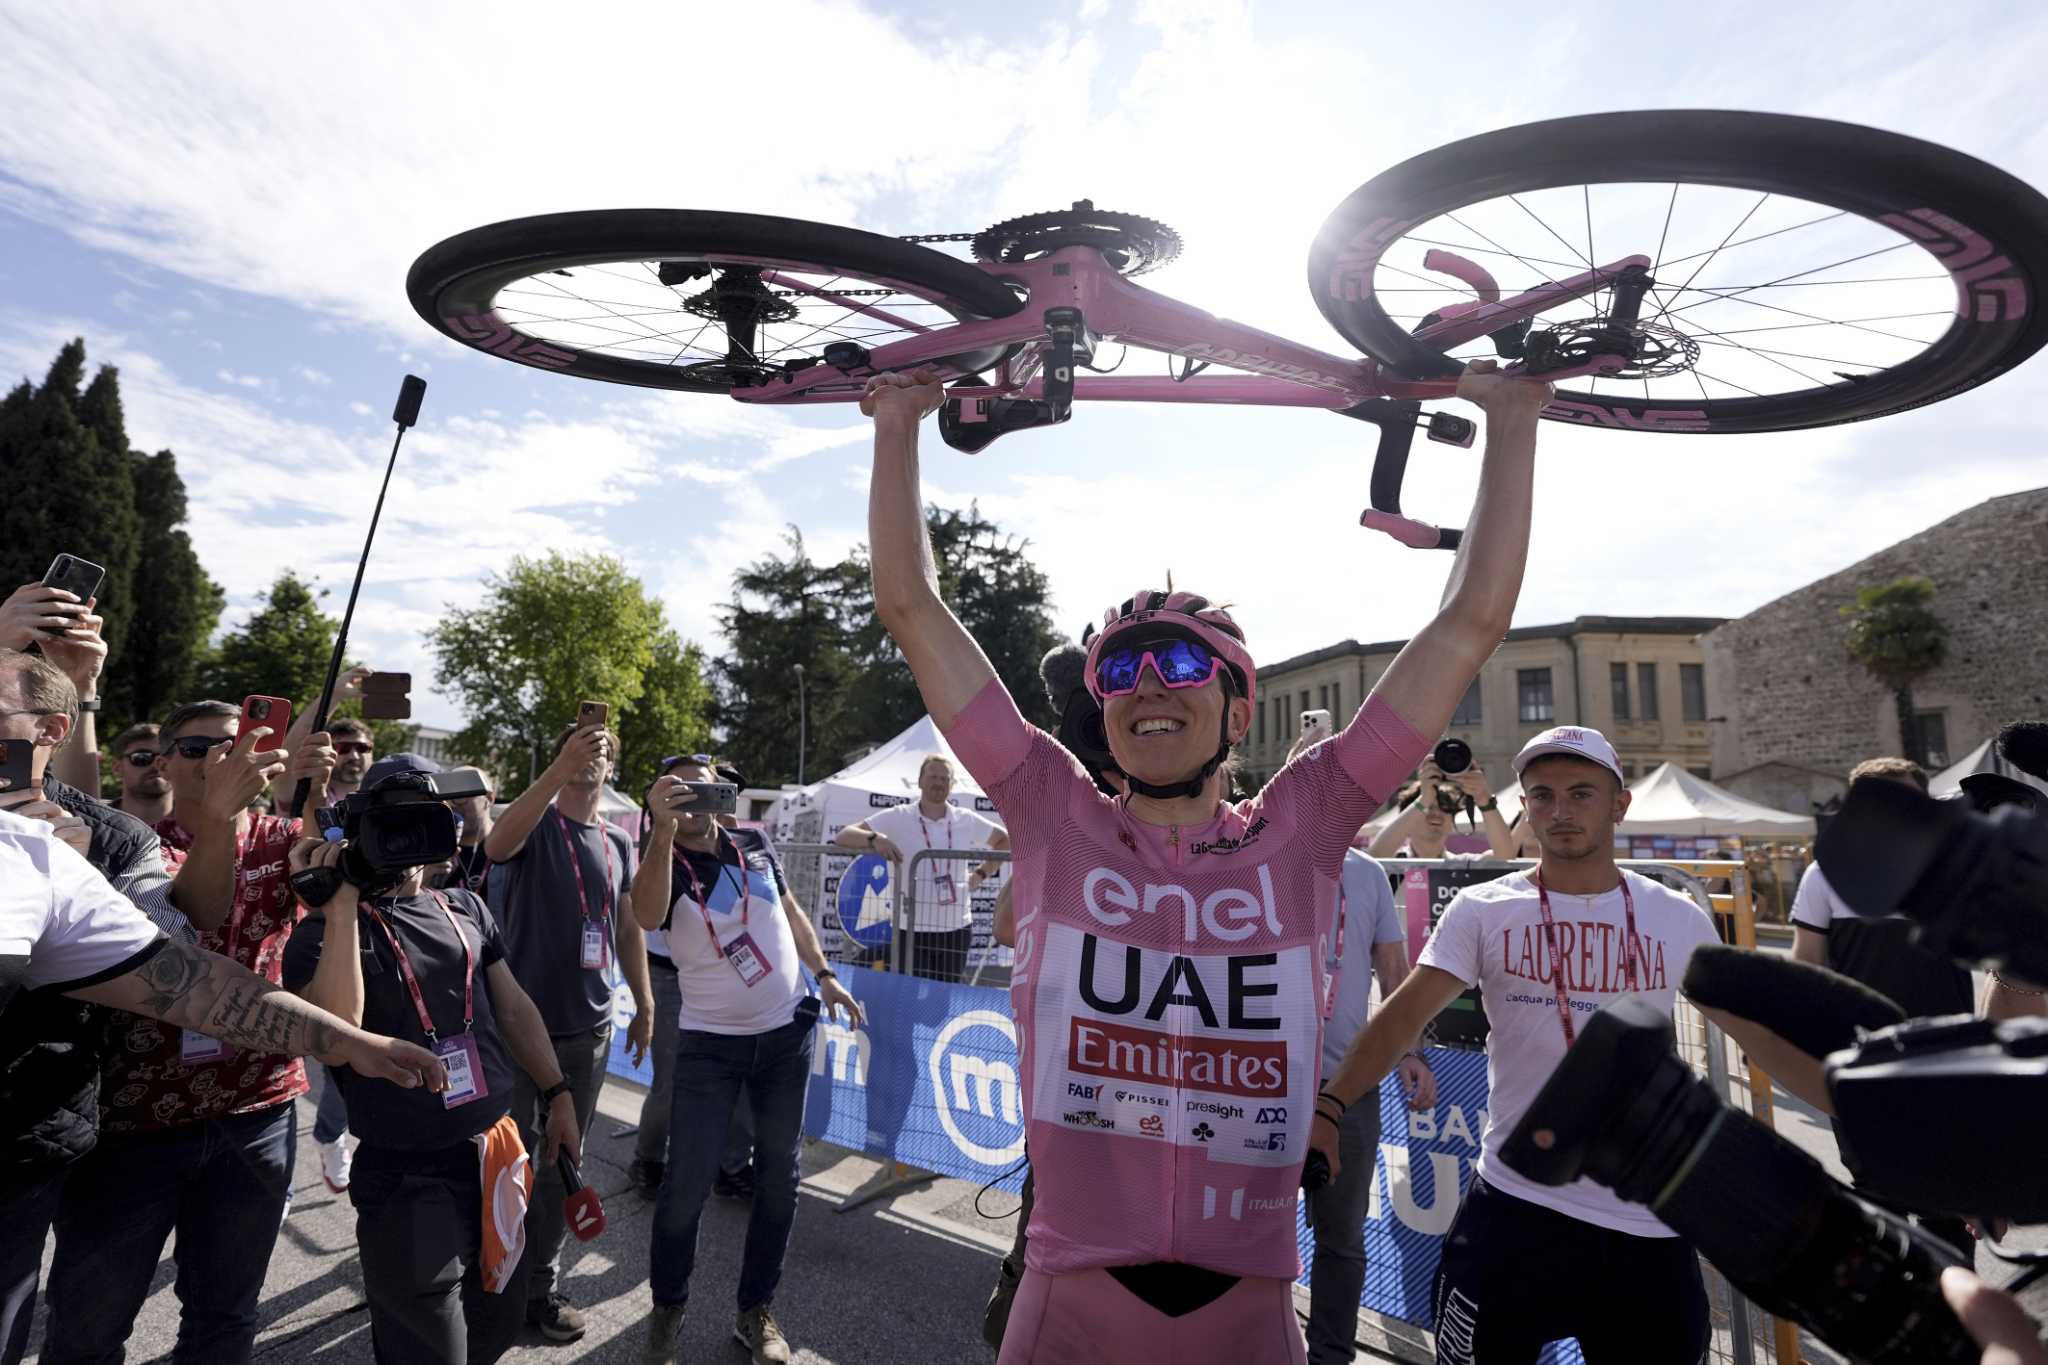 Pogacar all but wins Giro d'Italia on debut with another stunning stage victory